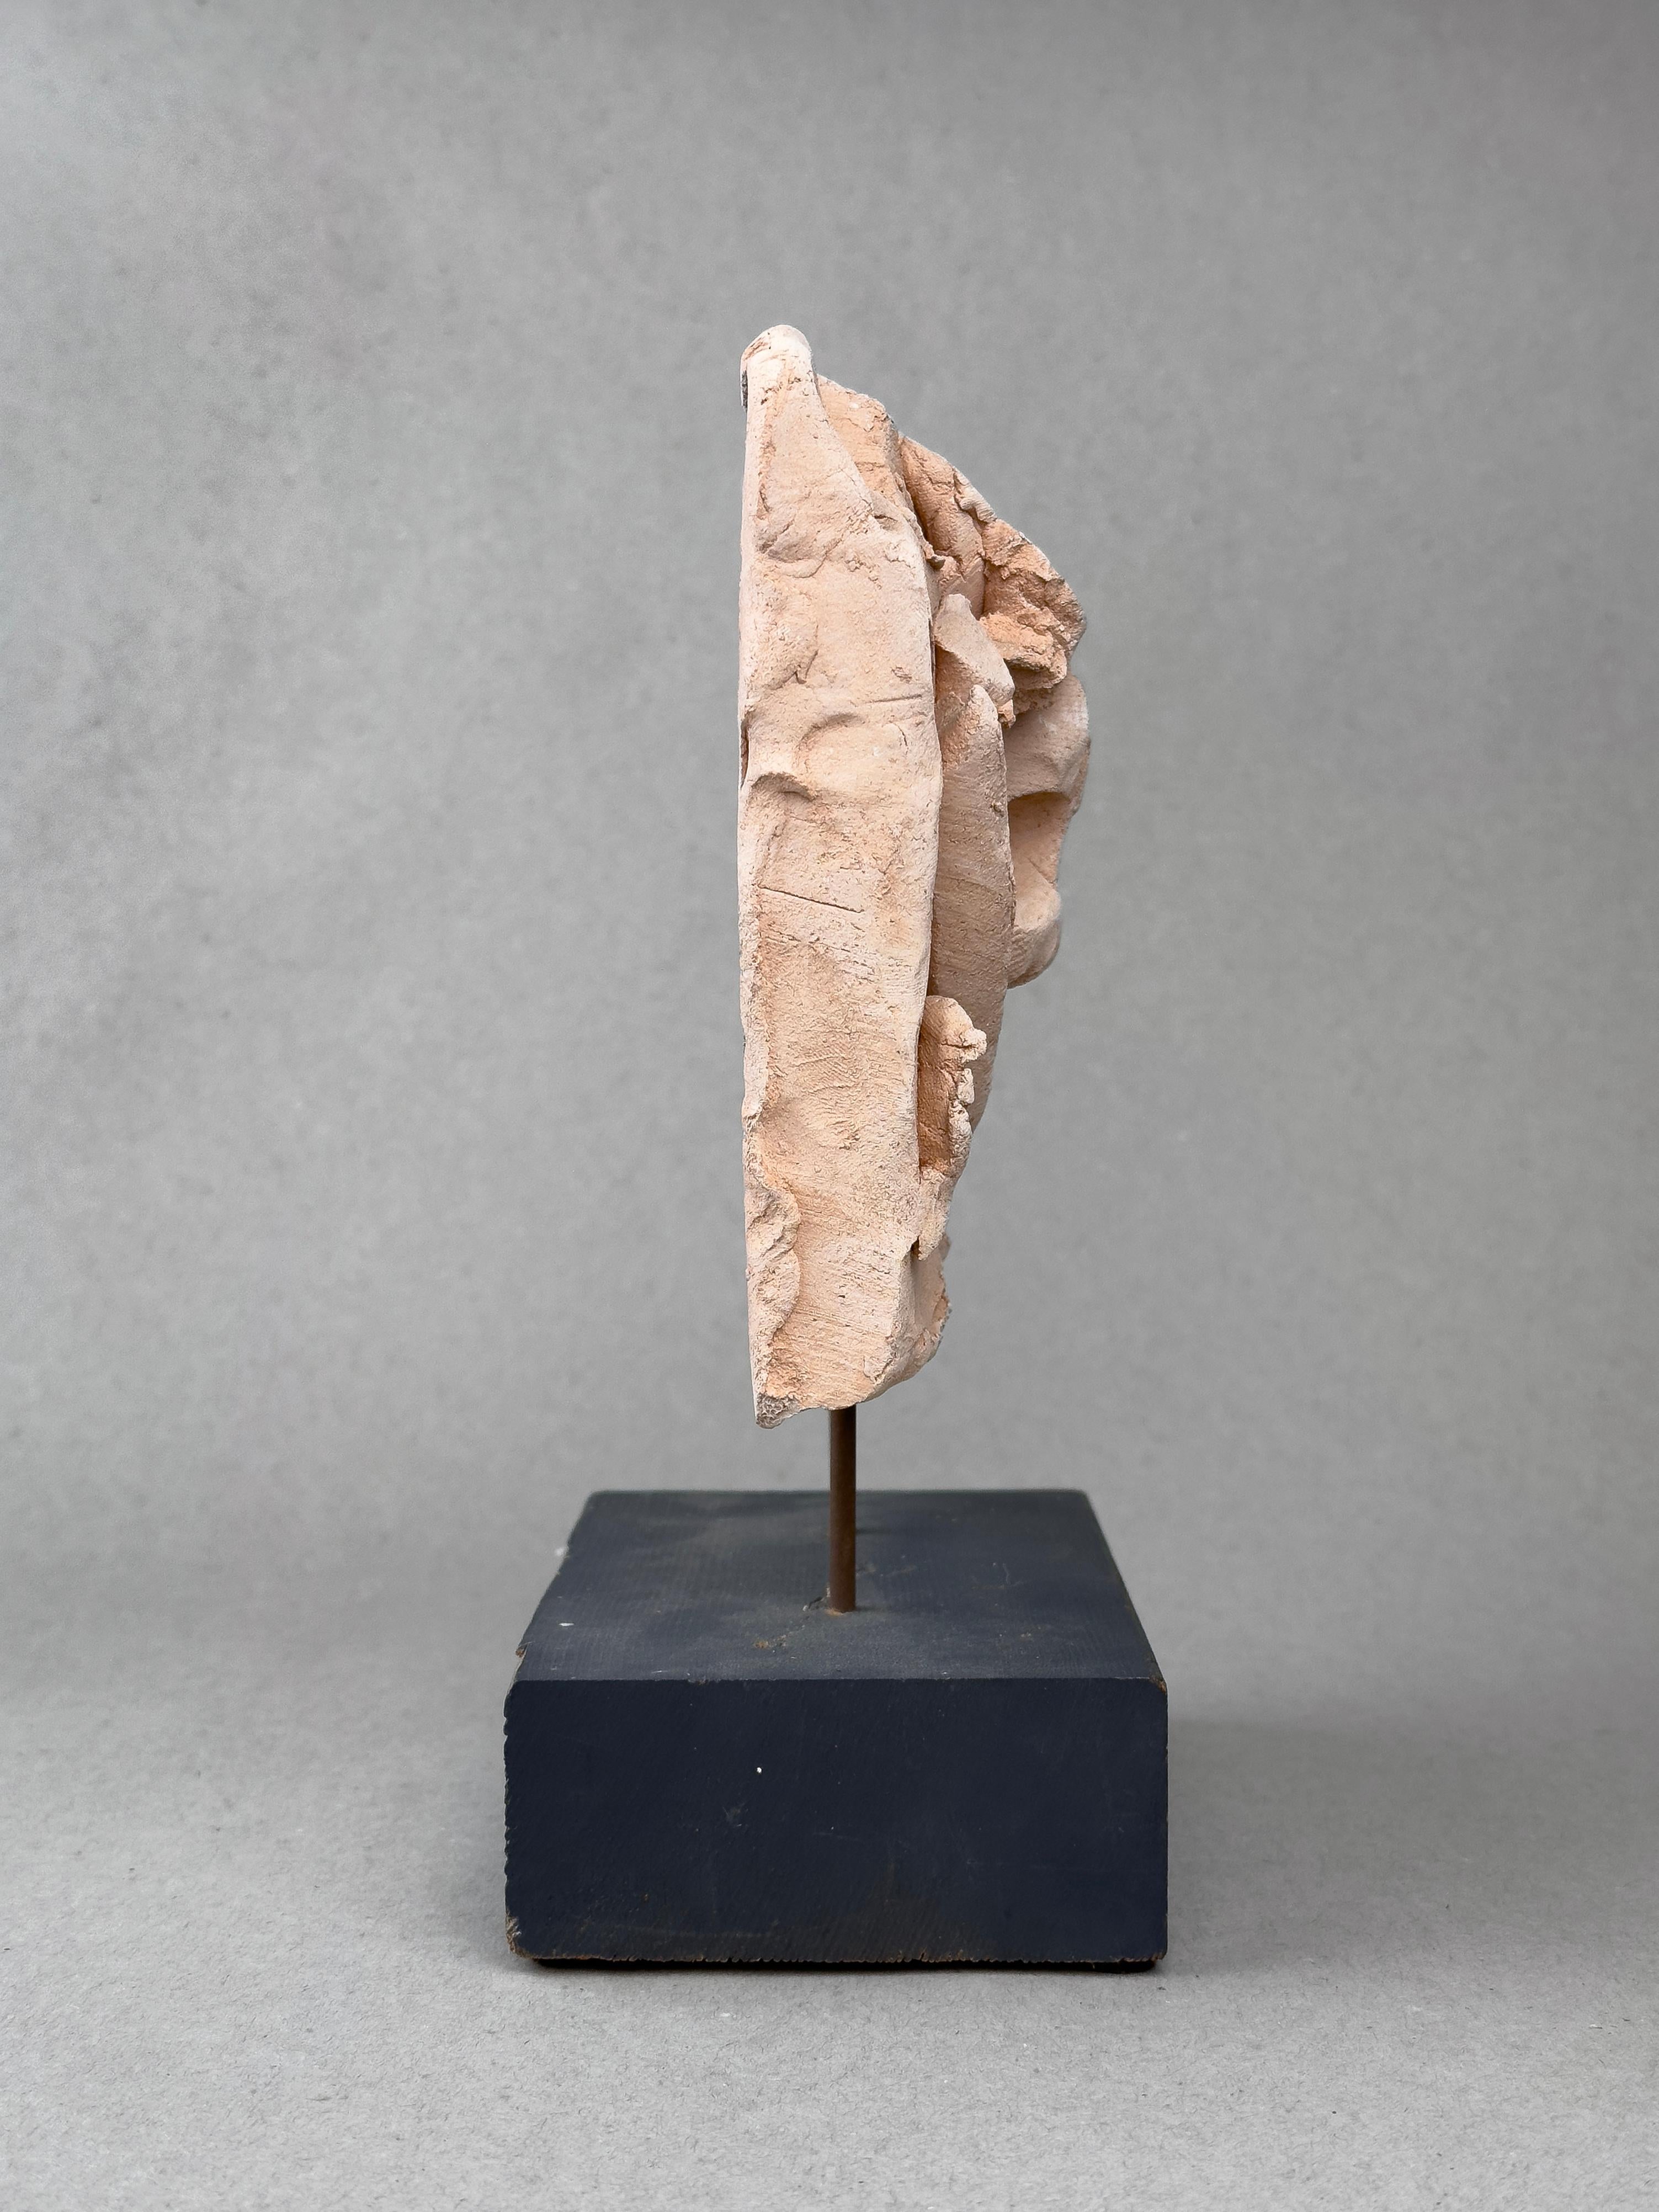 Abstract Form No. 2 - Sculpture by Emerson Woelffer